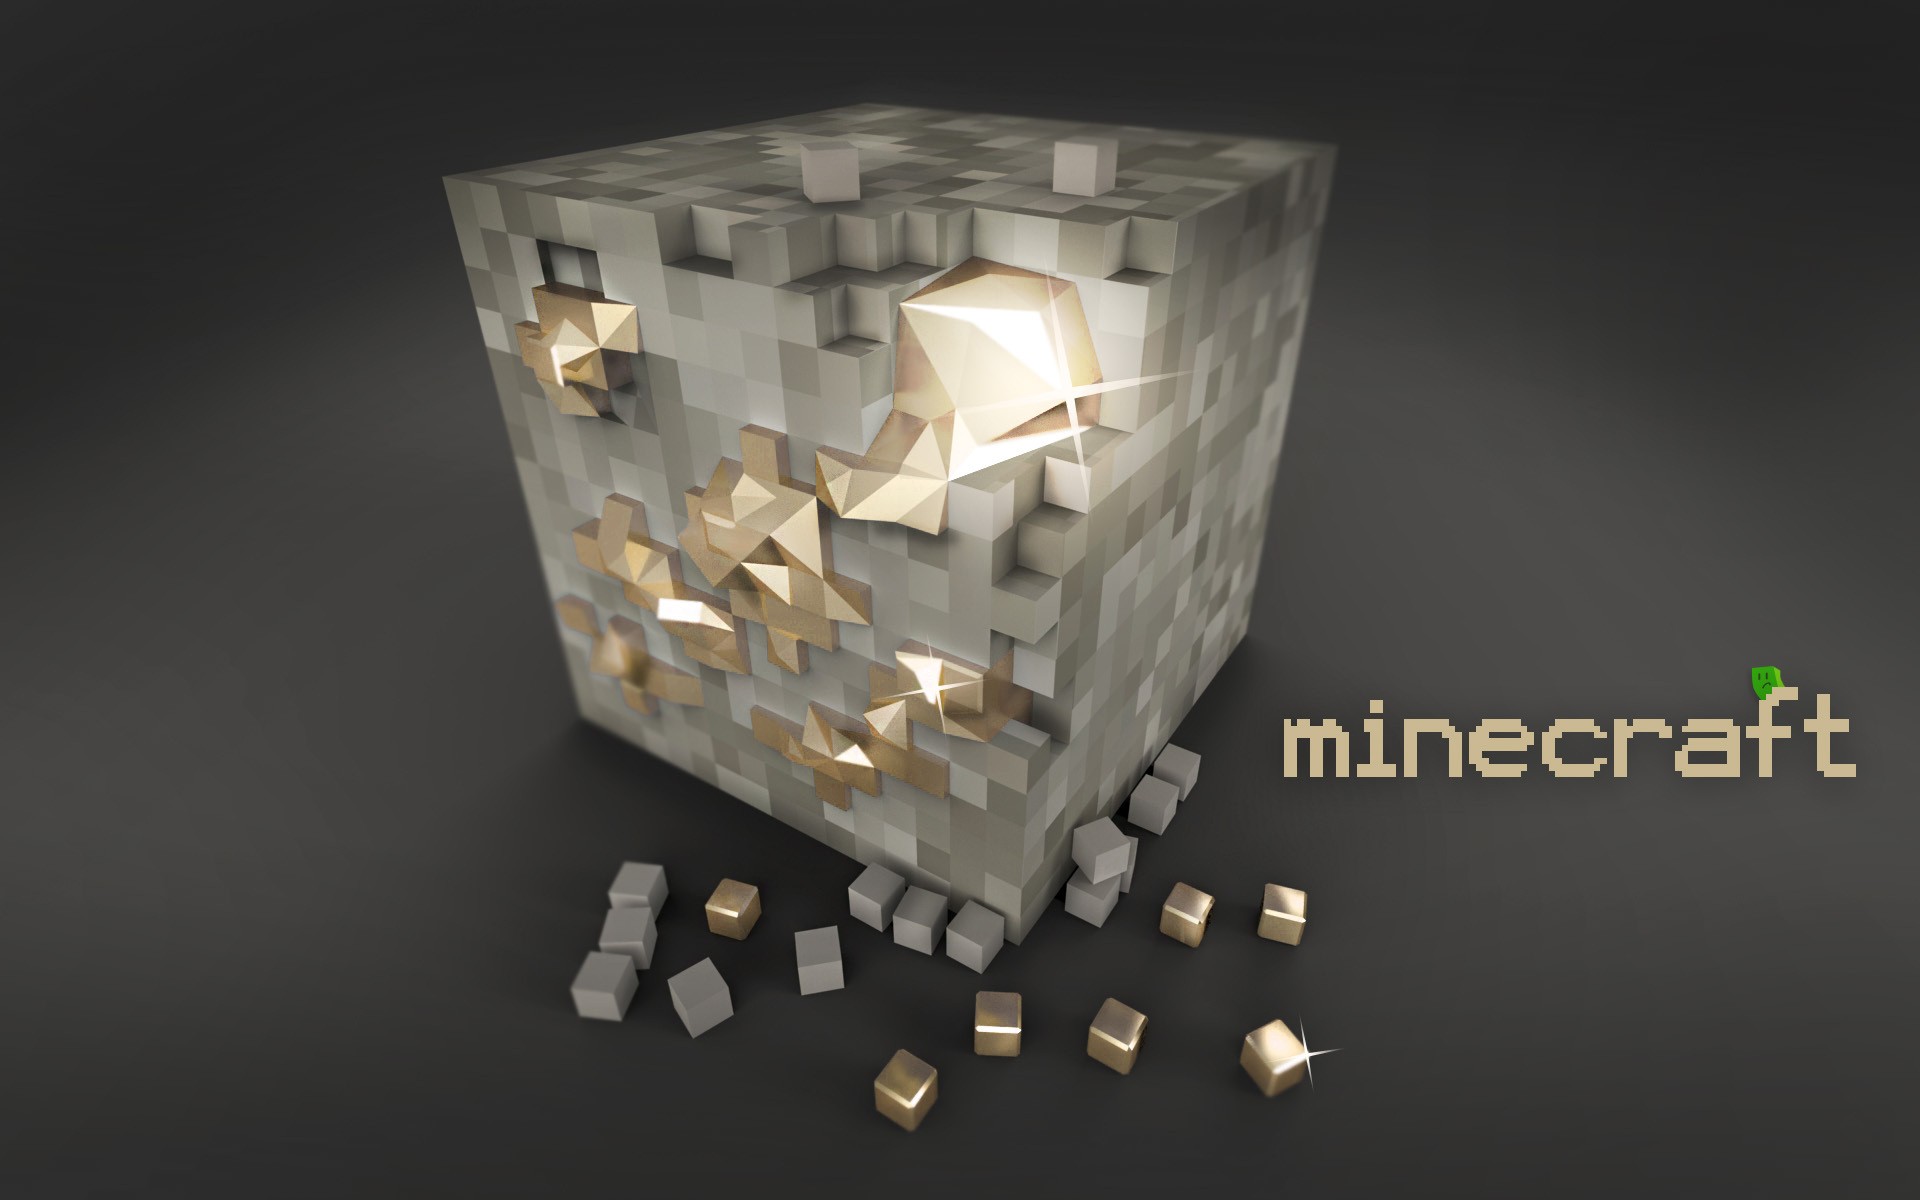 General 1920x1200 Minecraft video games minimalism cube 3D Blocks abstract 3D Abstract PC gaming video game art CGI simple background